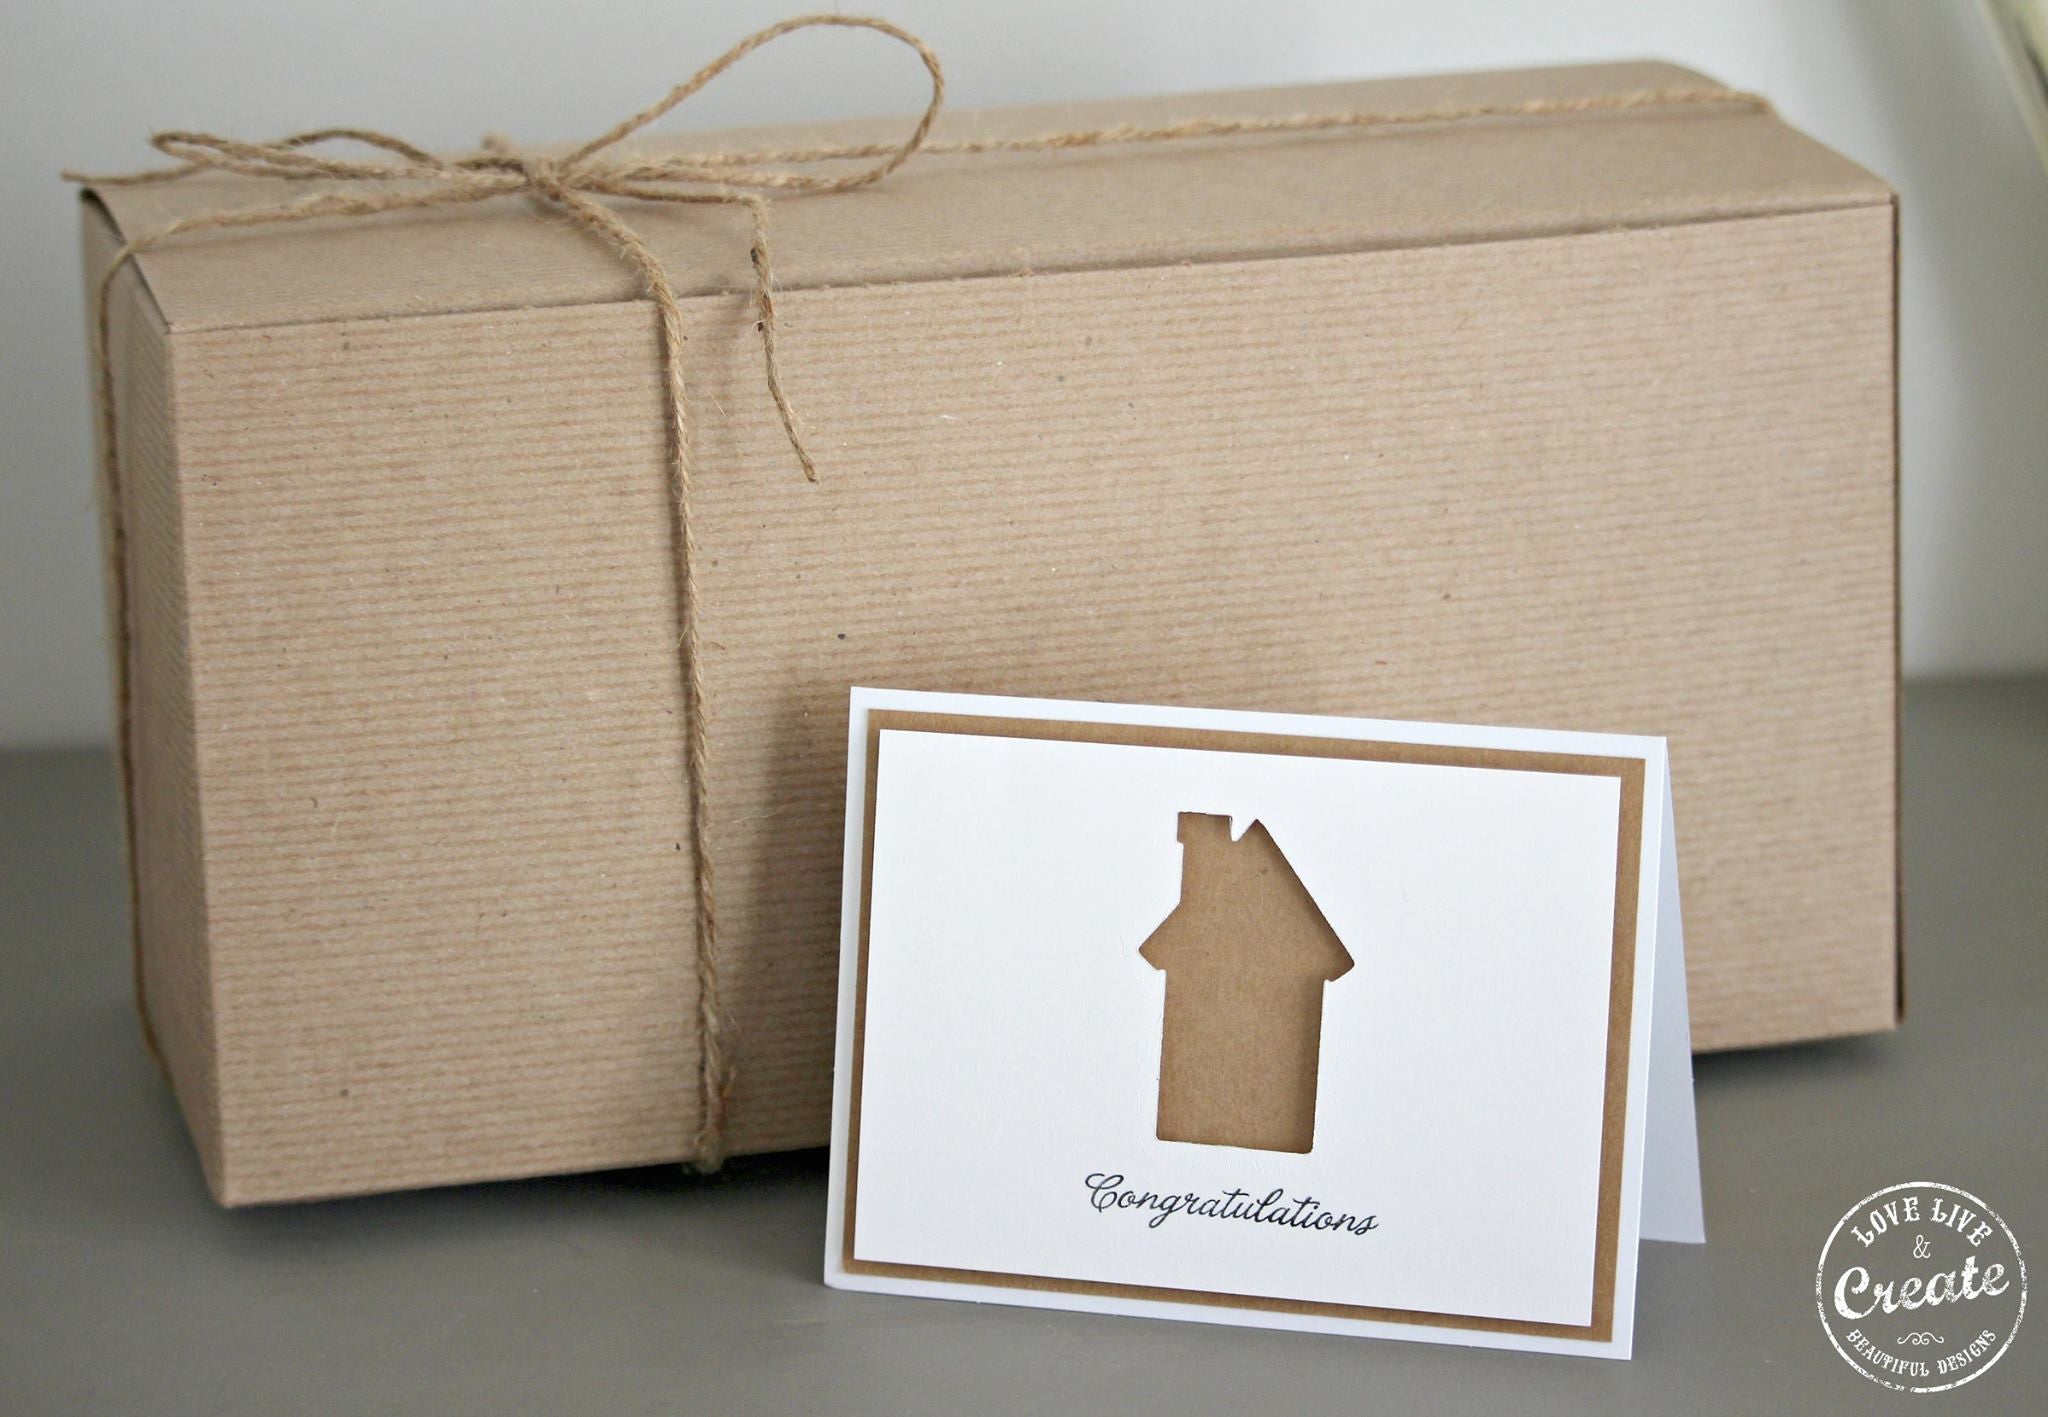 Do you need a fabulous gift for housewarming party? We got something special for you!!